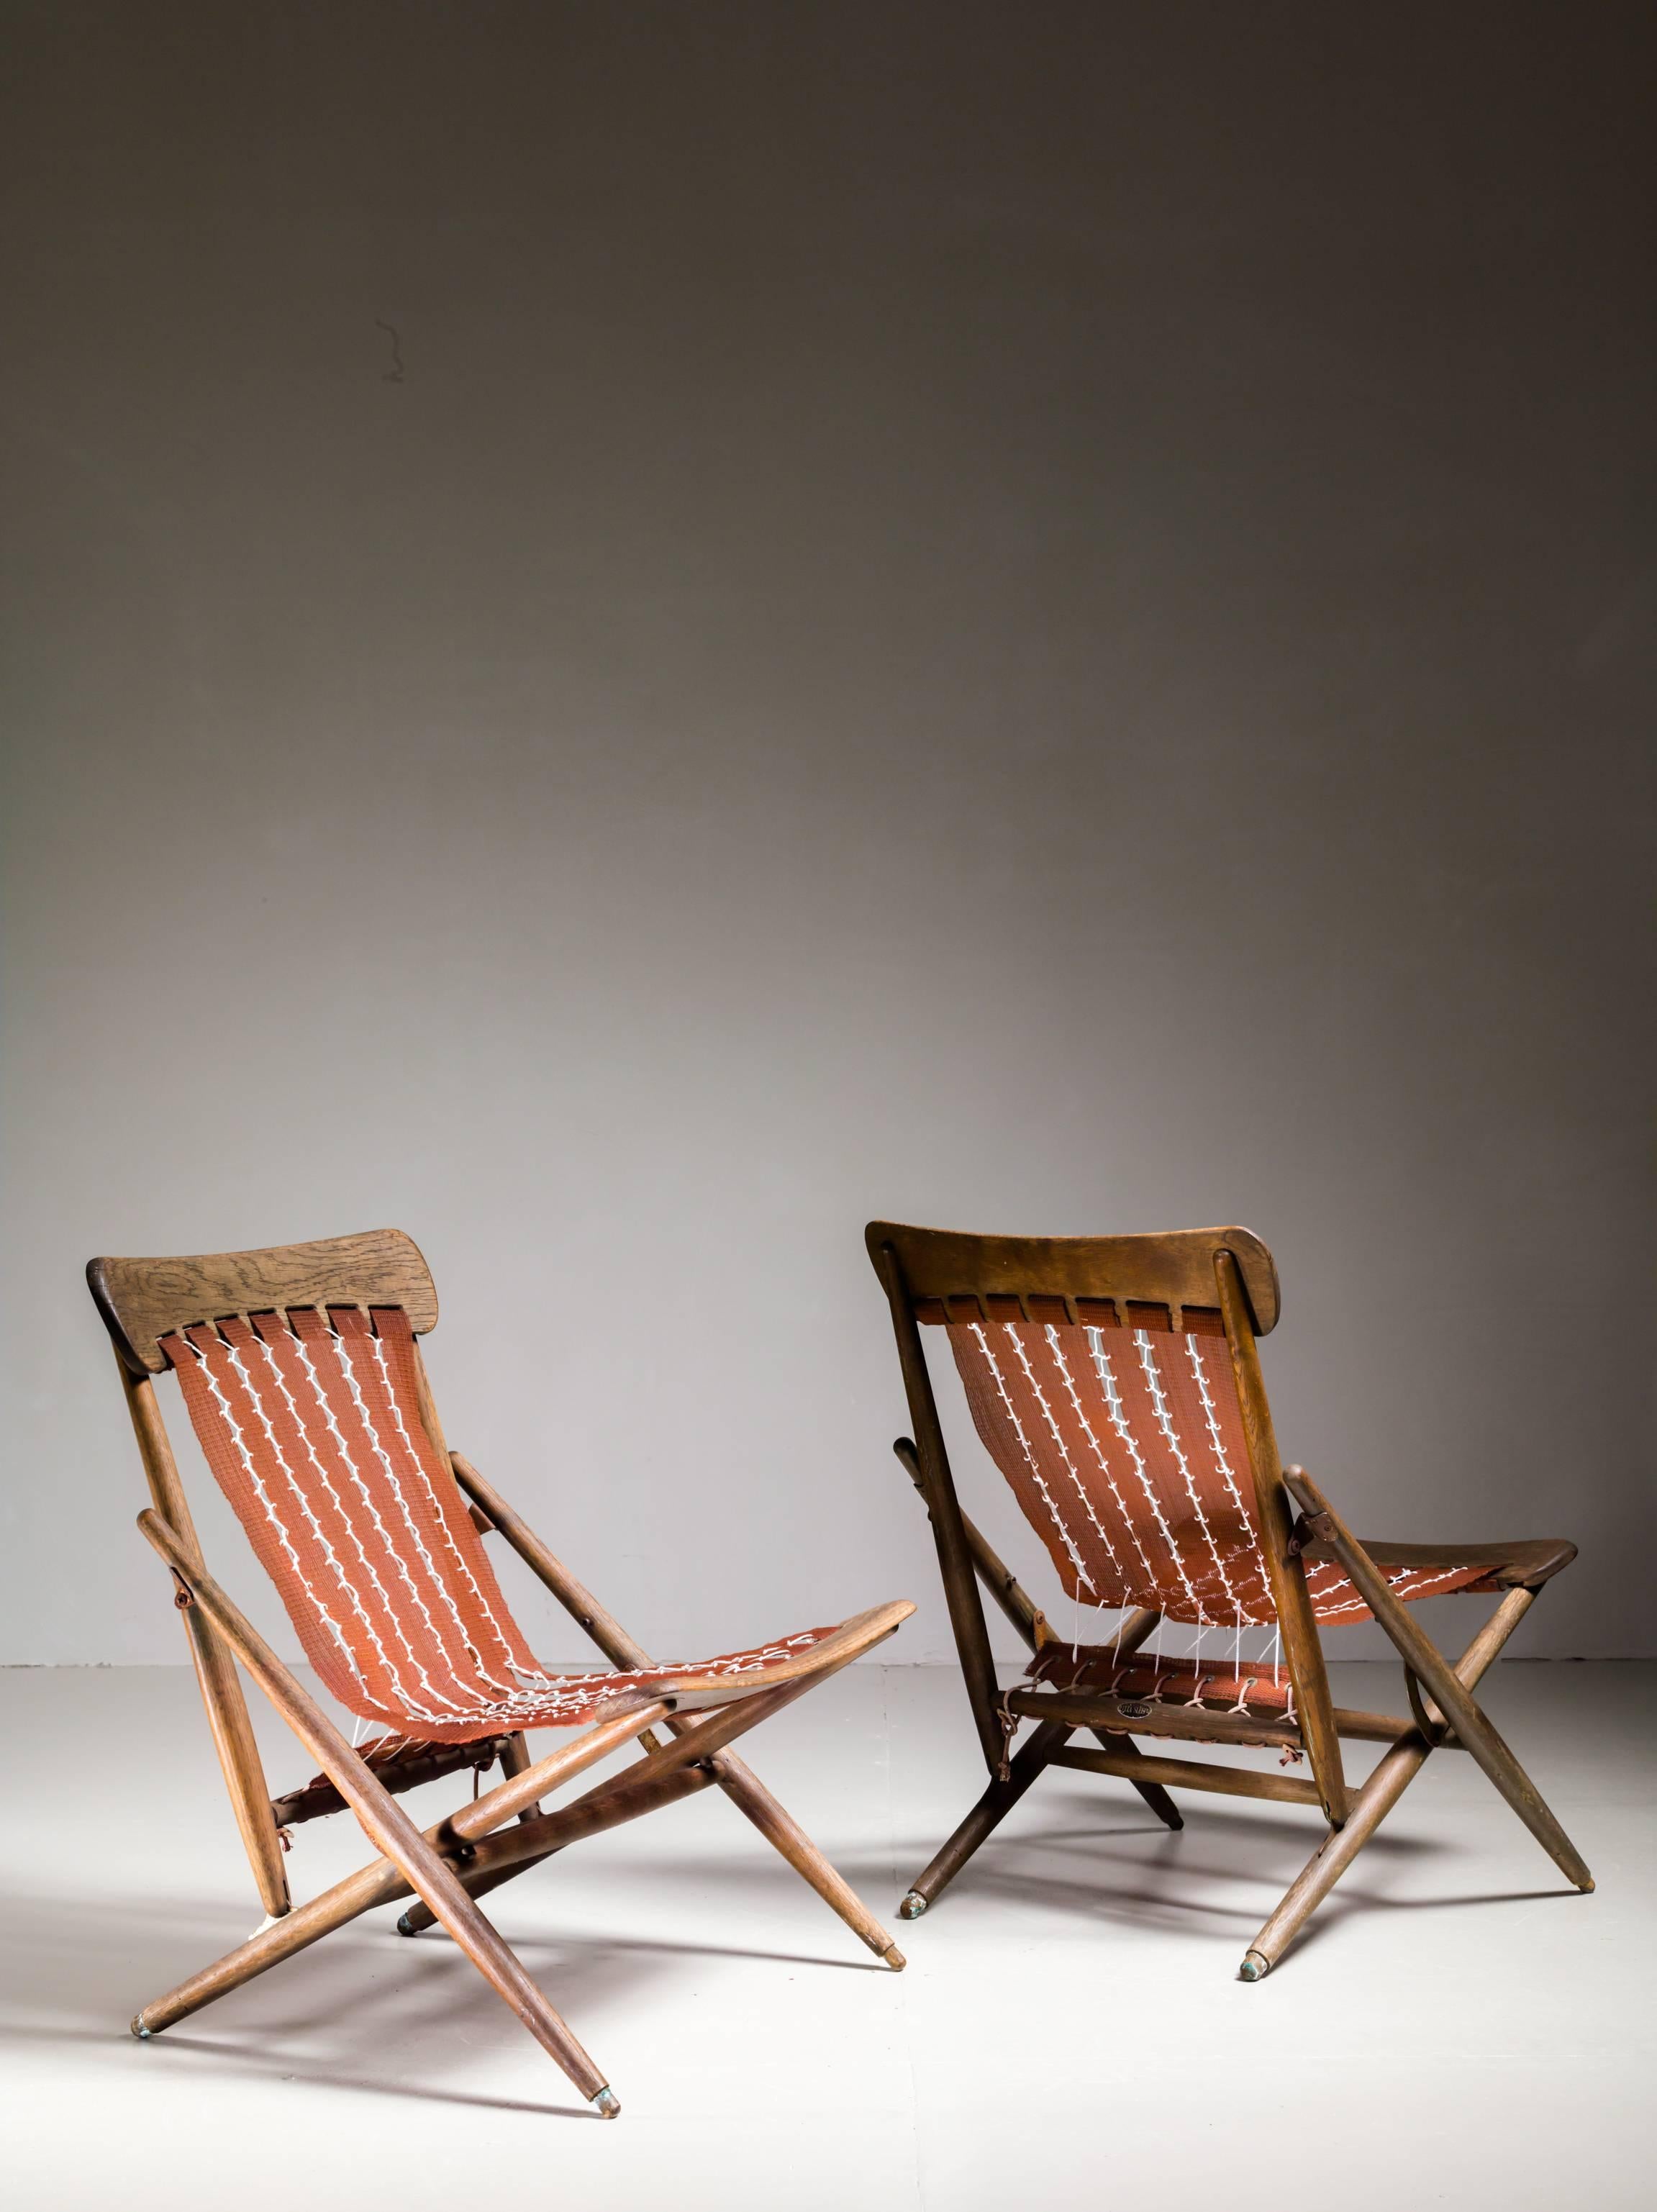 A pair of very rare foldable lounge chairs from the Maruni studio in Hiroshima.
The chairs are made of an oak frame and a sling seating of the original brown nylon mesh with new white cord. The wood is weathered from age, but still in a sound